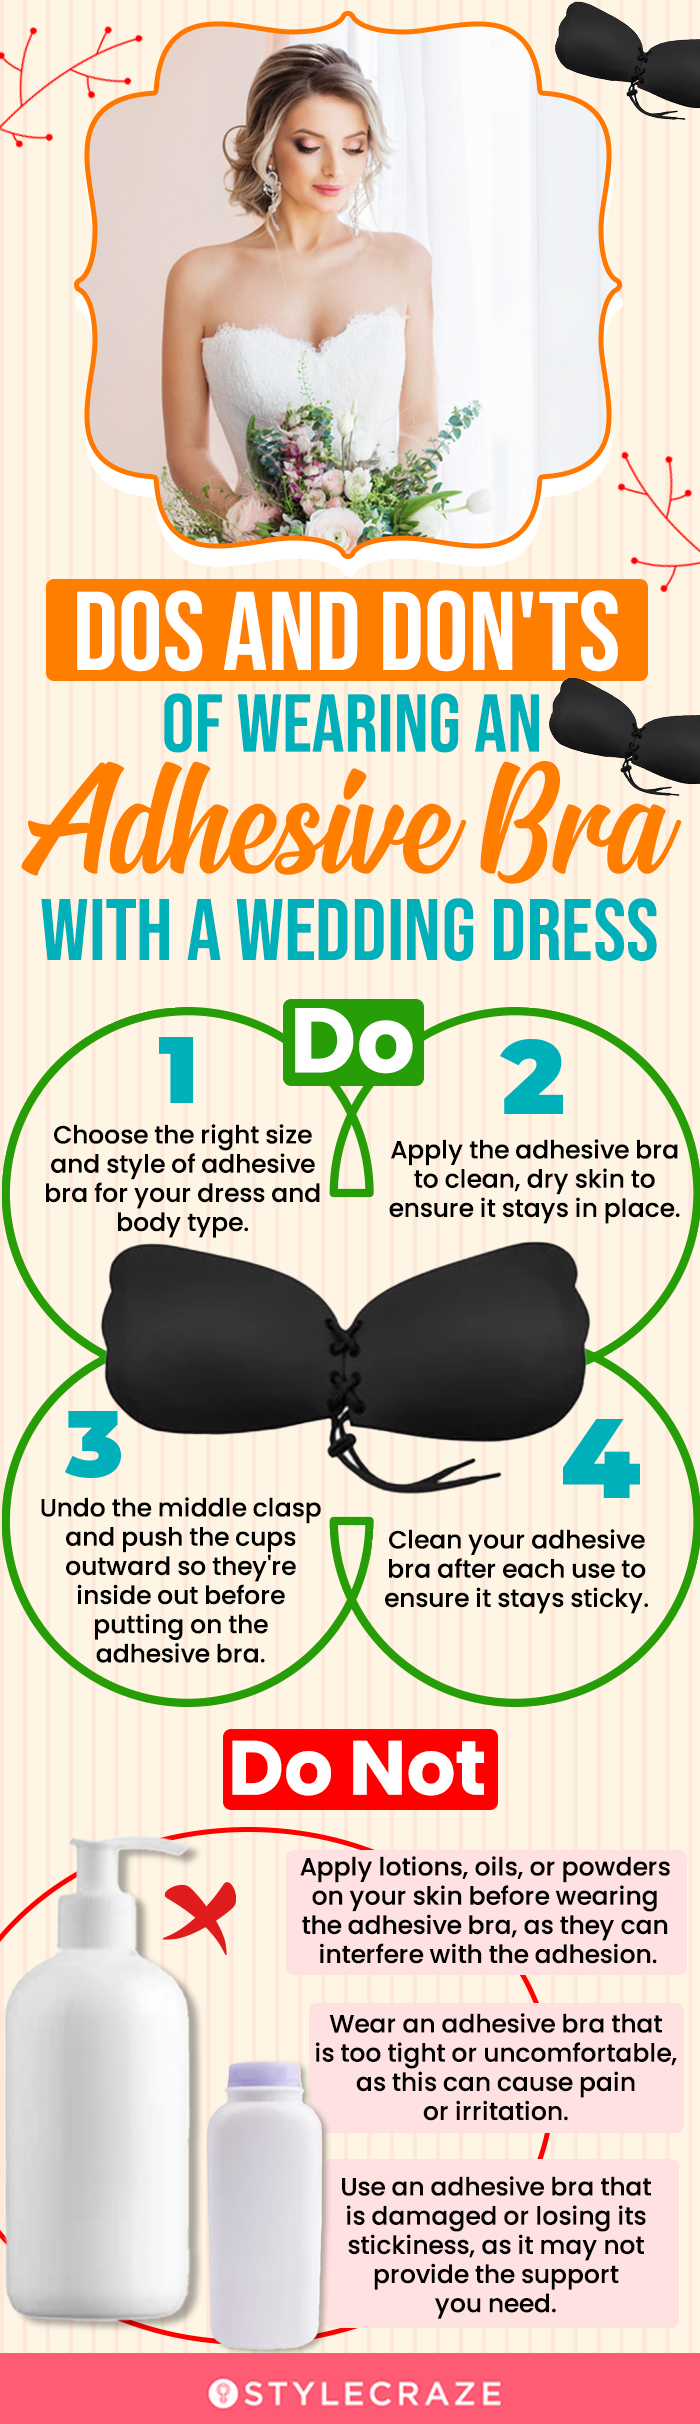 Do's And Don'ts Of Wearing An Adhesive Bra With A Wedding Dress (infographic)